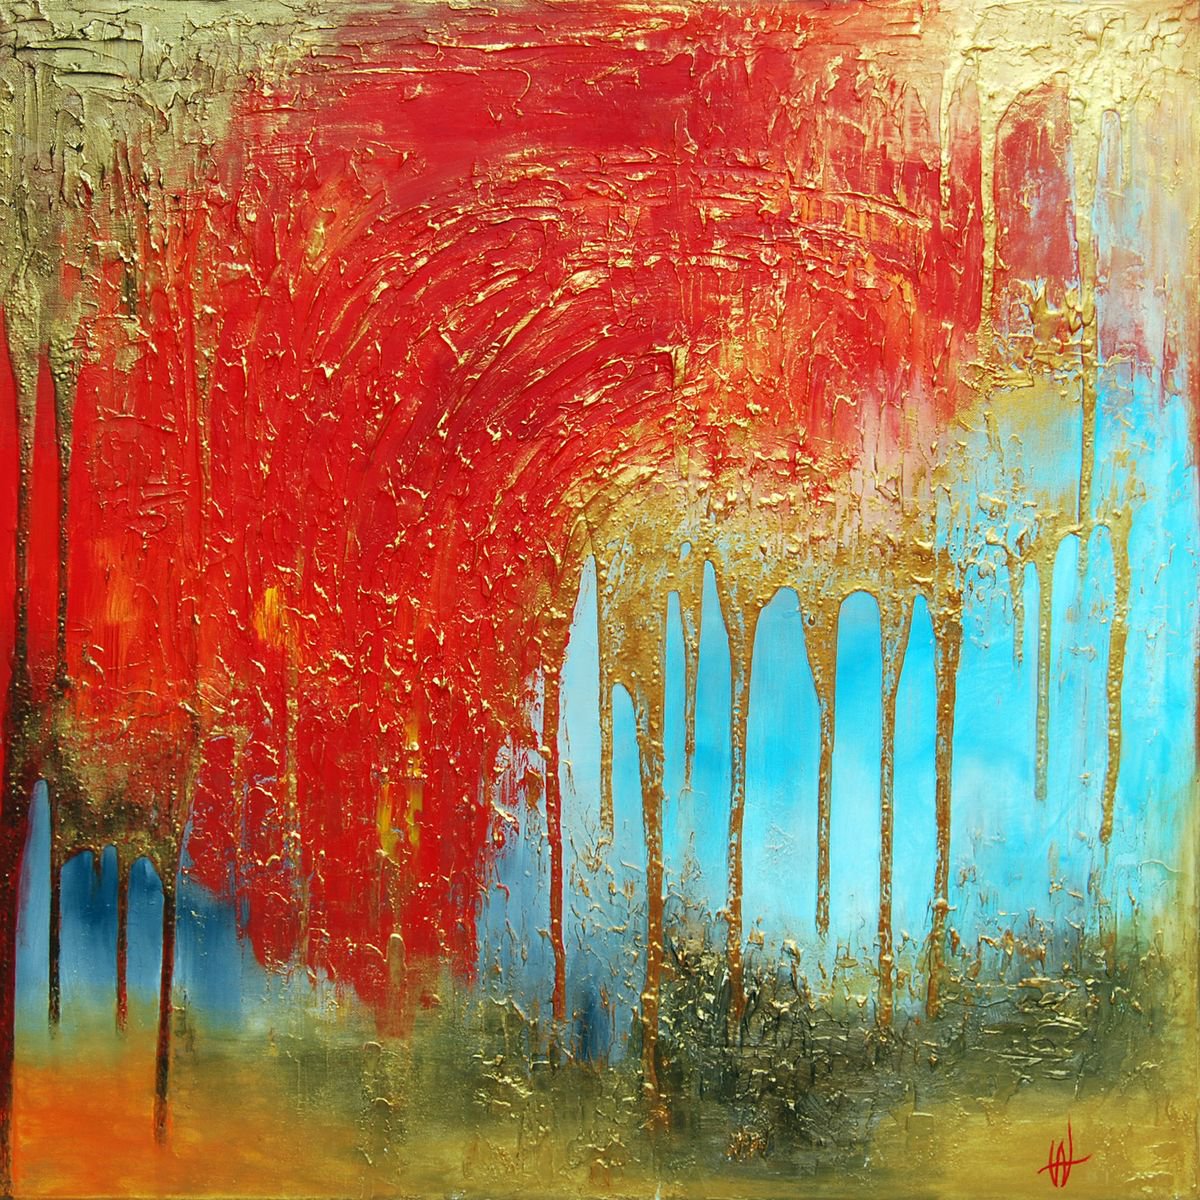 Abstract art _ DAWN OF A HAPPY DAY by VANADA ABSTRACT ART